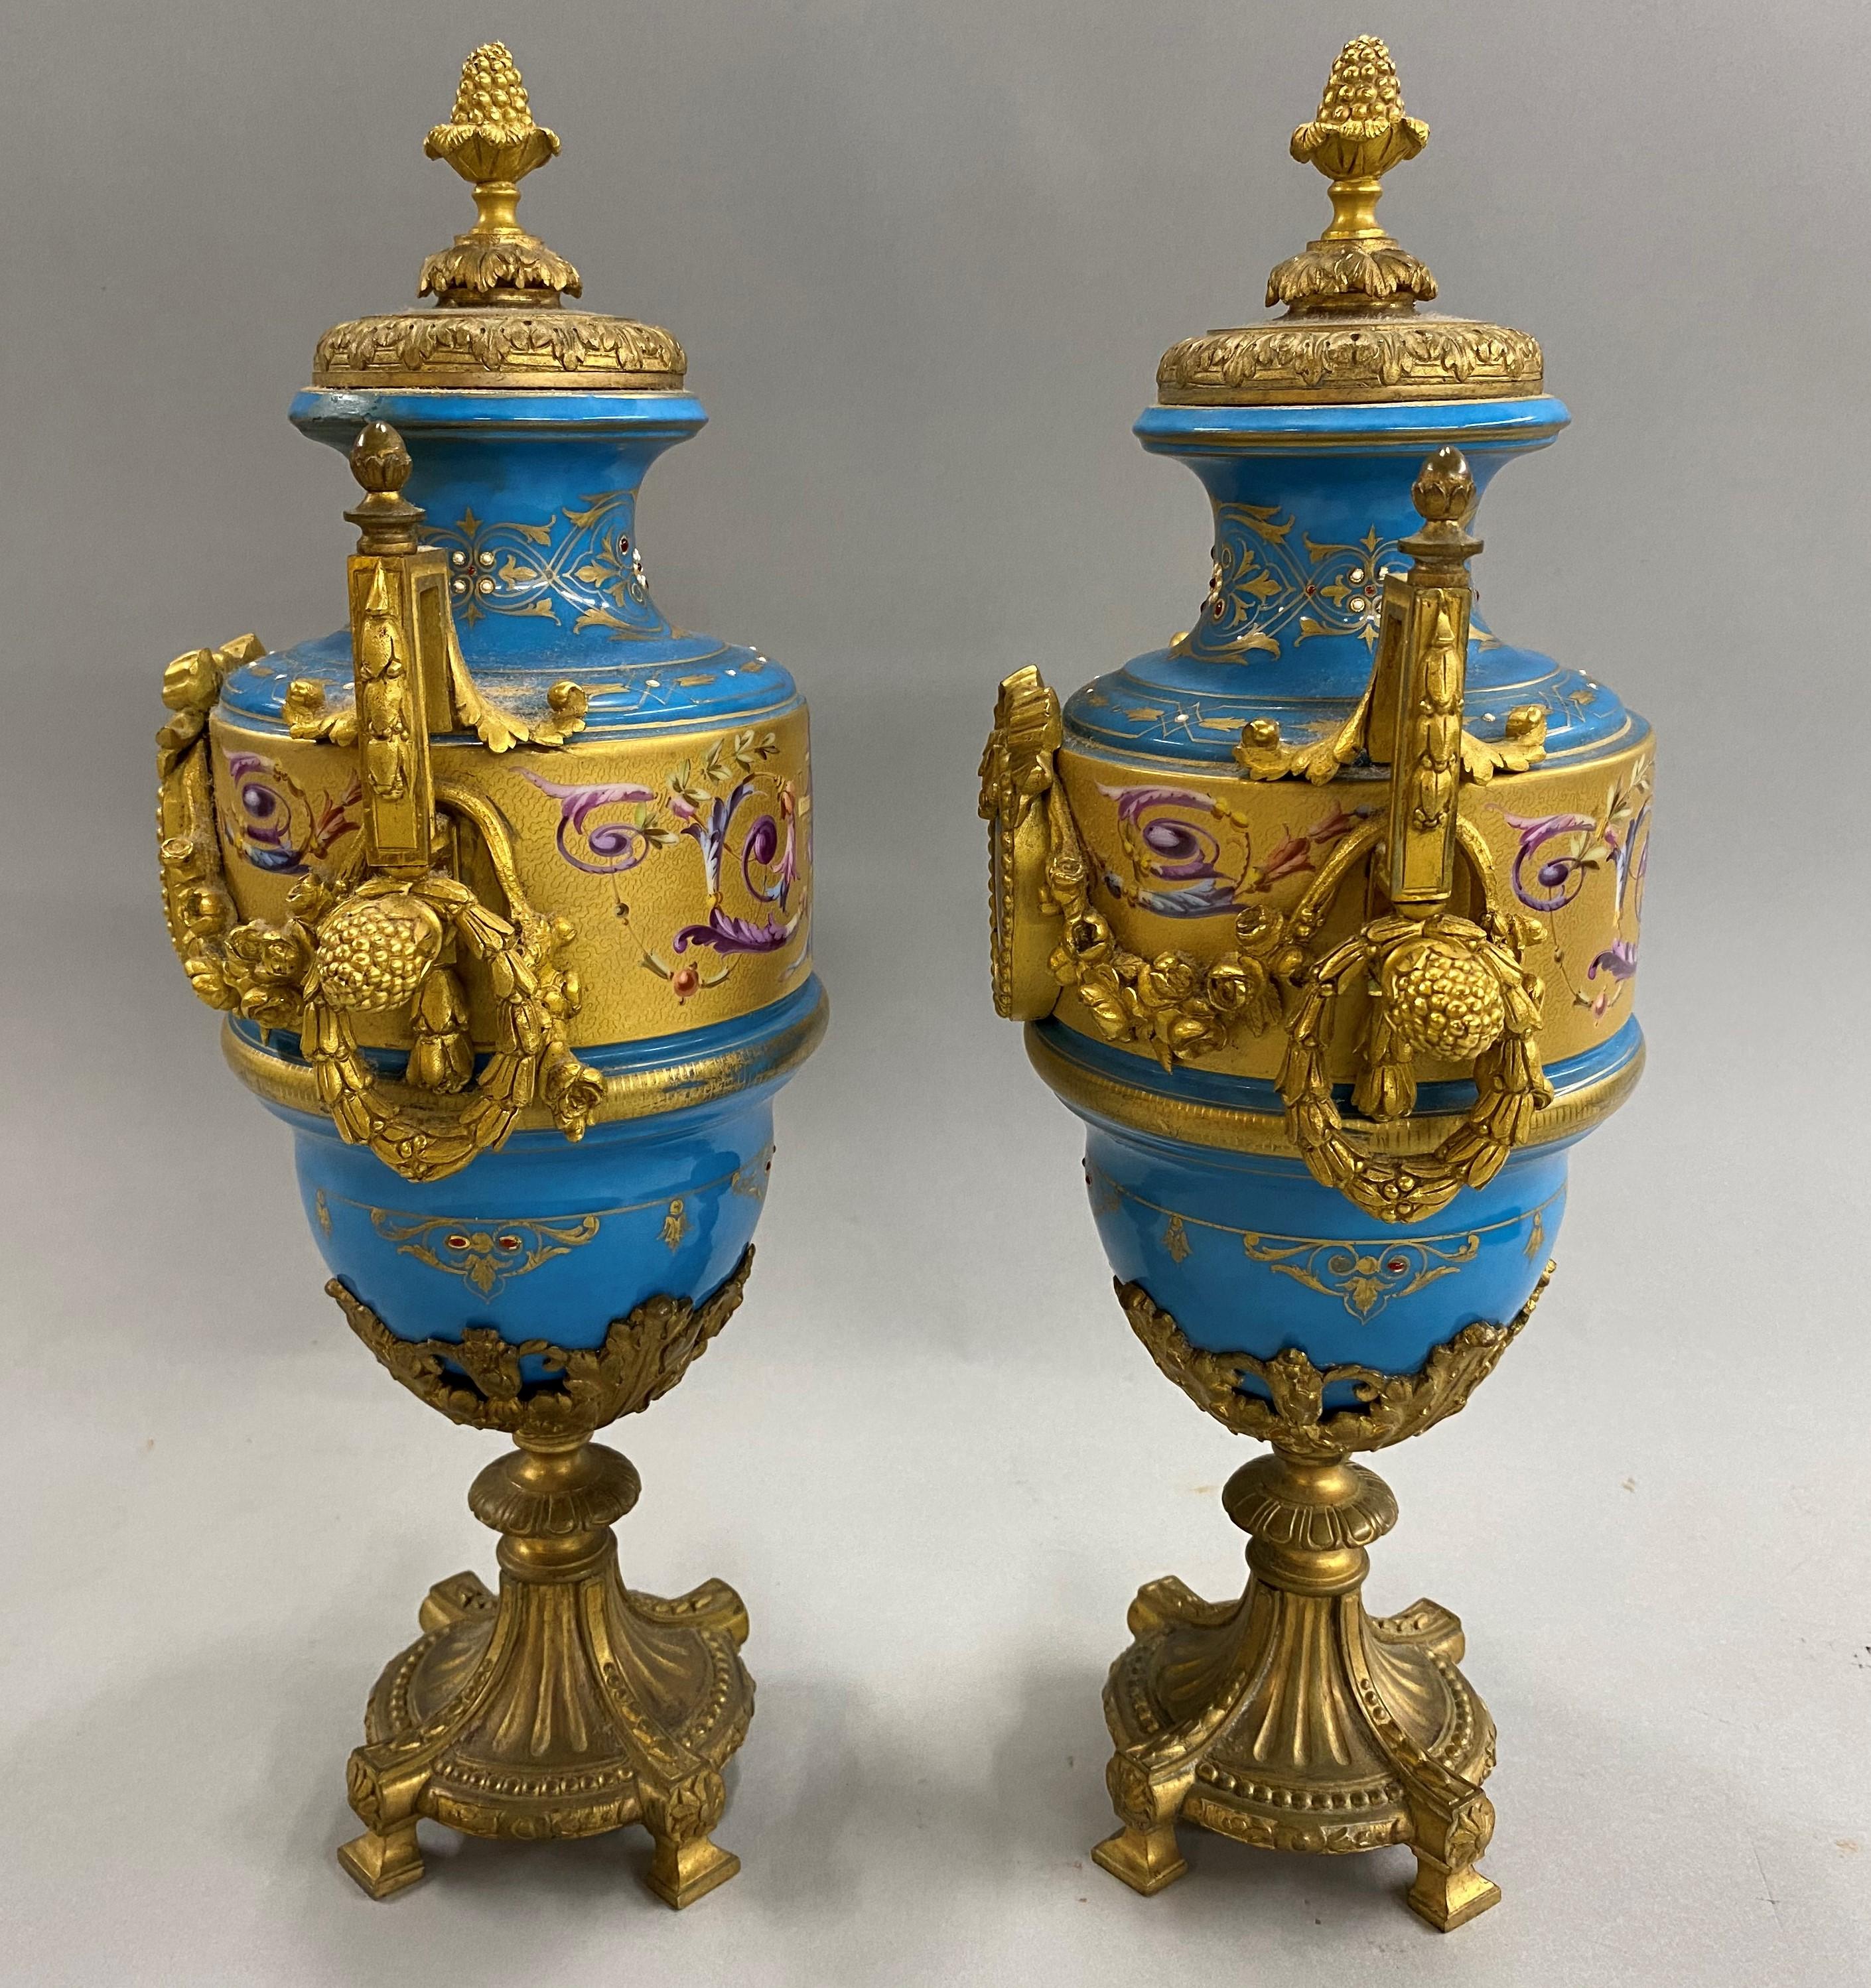 19th Century Pair of French Sevres Celeste Blue Porcelain Urns with Gilt Ormolu 7